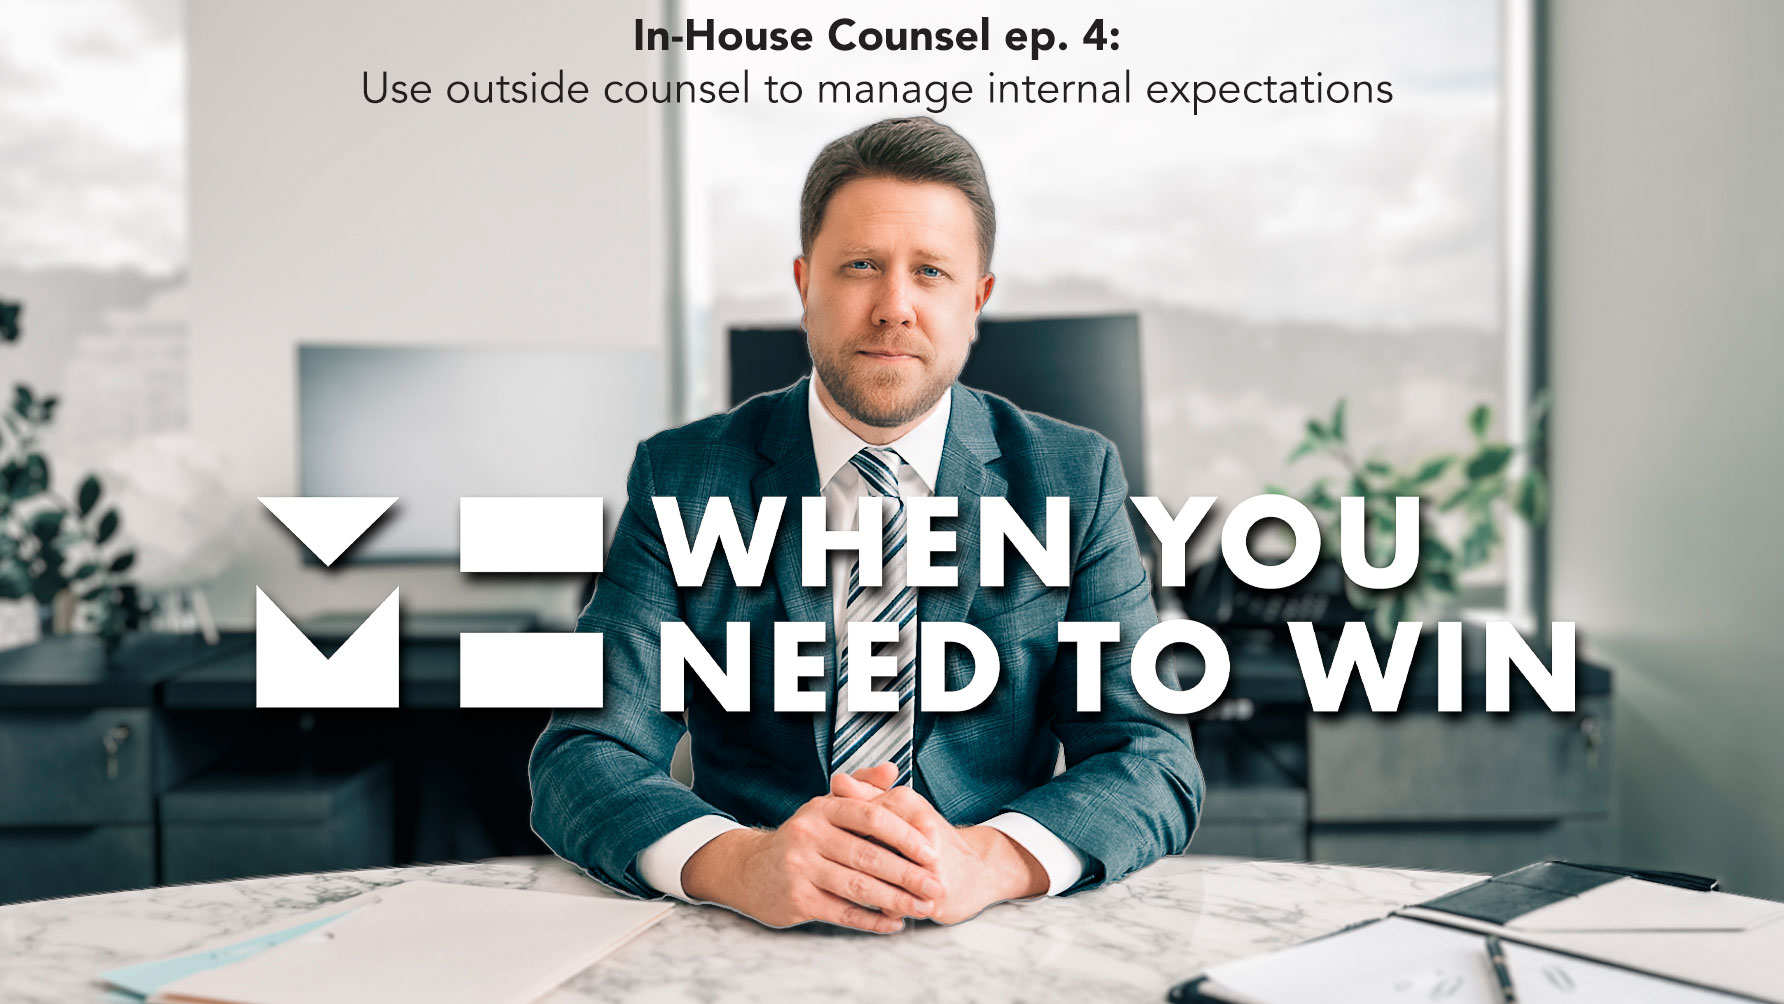 When You Need to Win - In-House Counsel Edition - Use Outside Counsel to Manage Internal Communications 